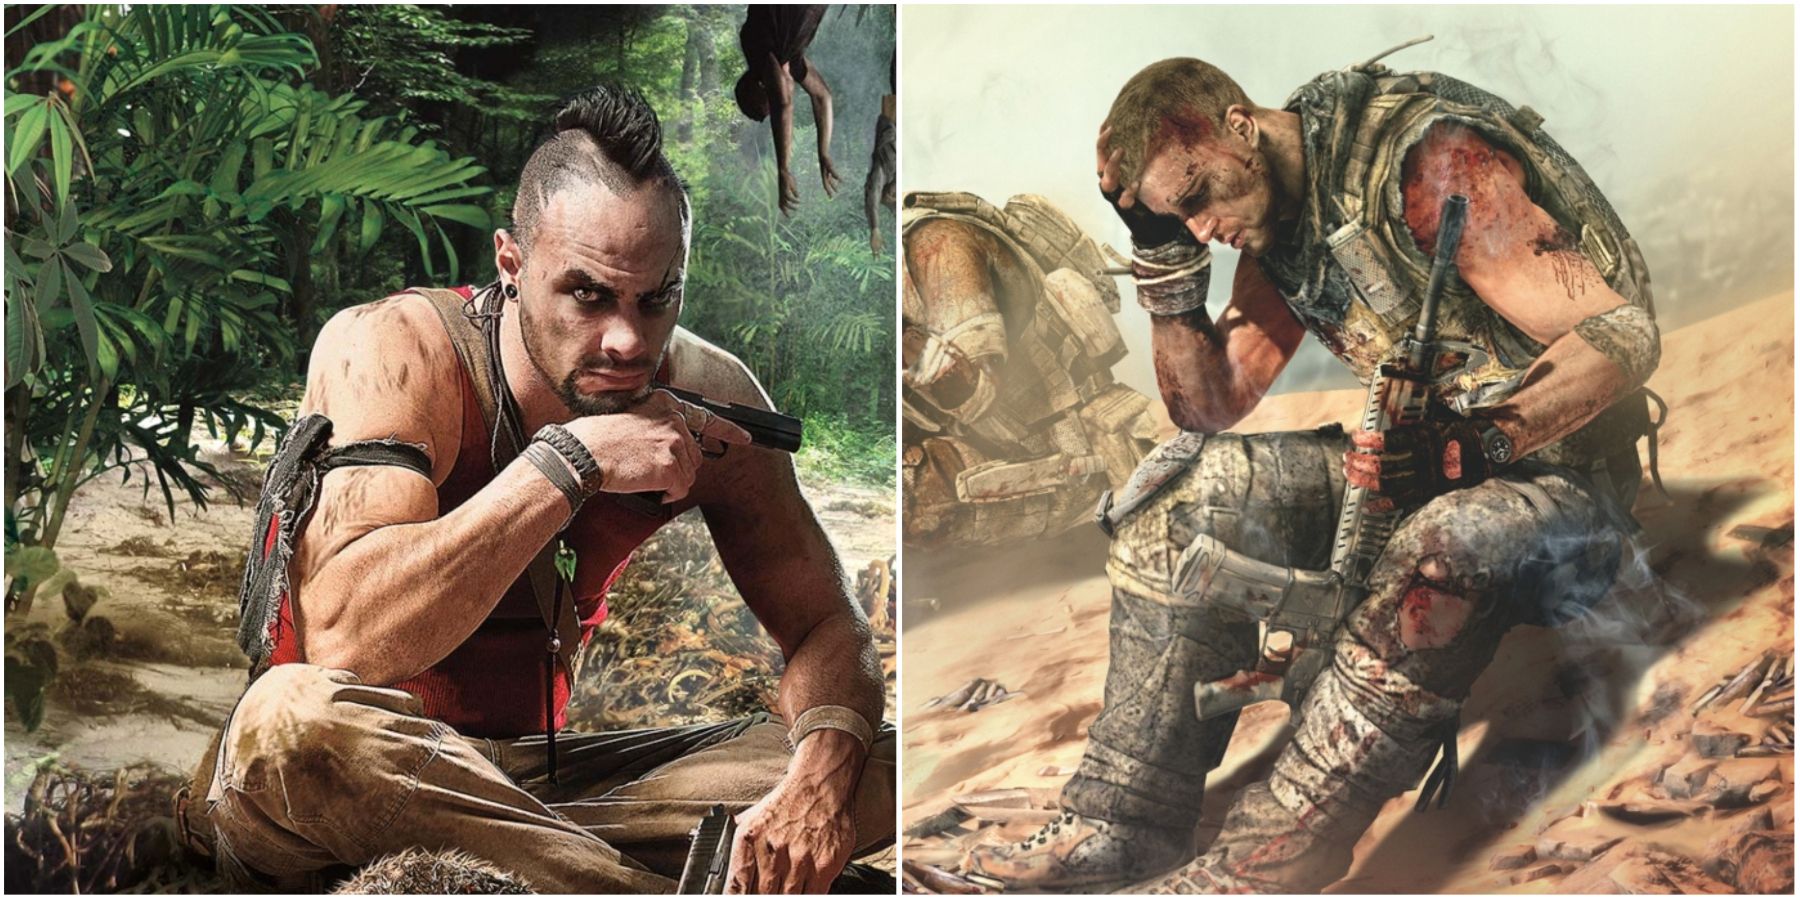 Far Cry 3 (left) and Spec Ops: The Line (right)